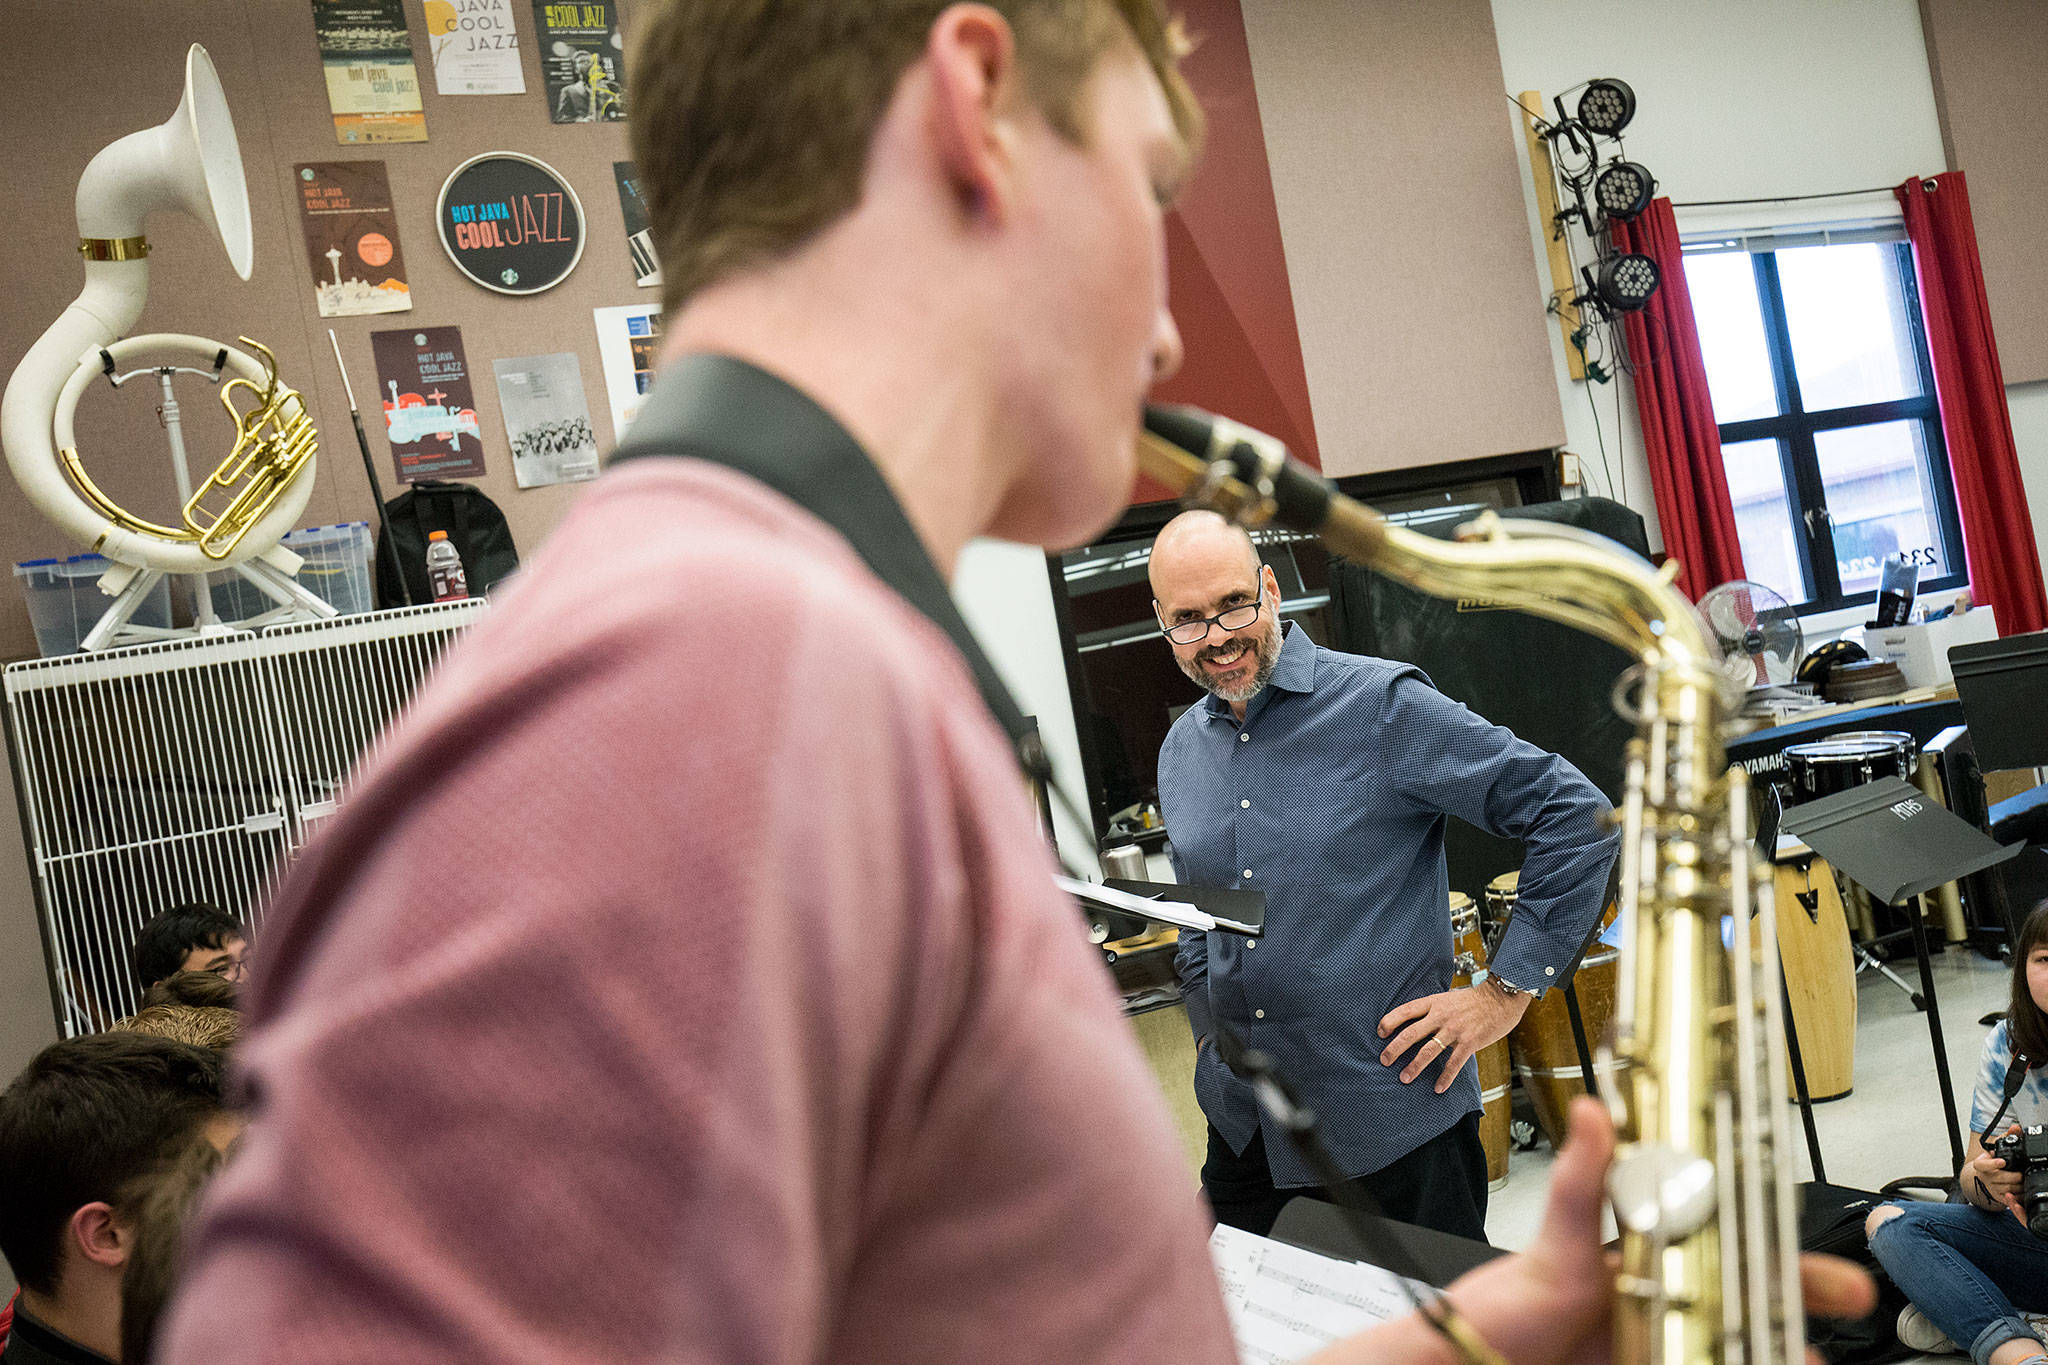 Steve Fidyk smiles during Ben Leonard’s saxophone solo as the Mountlake Terrace High School’s band rehearses April 16. Fidyk, a longtime drummer, composer and educator at Temple University, spent the afternoon advising the dozen or so musicians preparing for Essentially Ellington, a high school jazz band competition and festival held on May 10-12 at the Lincoln Center in New York City. (Andy Bronson / The Herald)